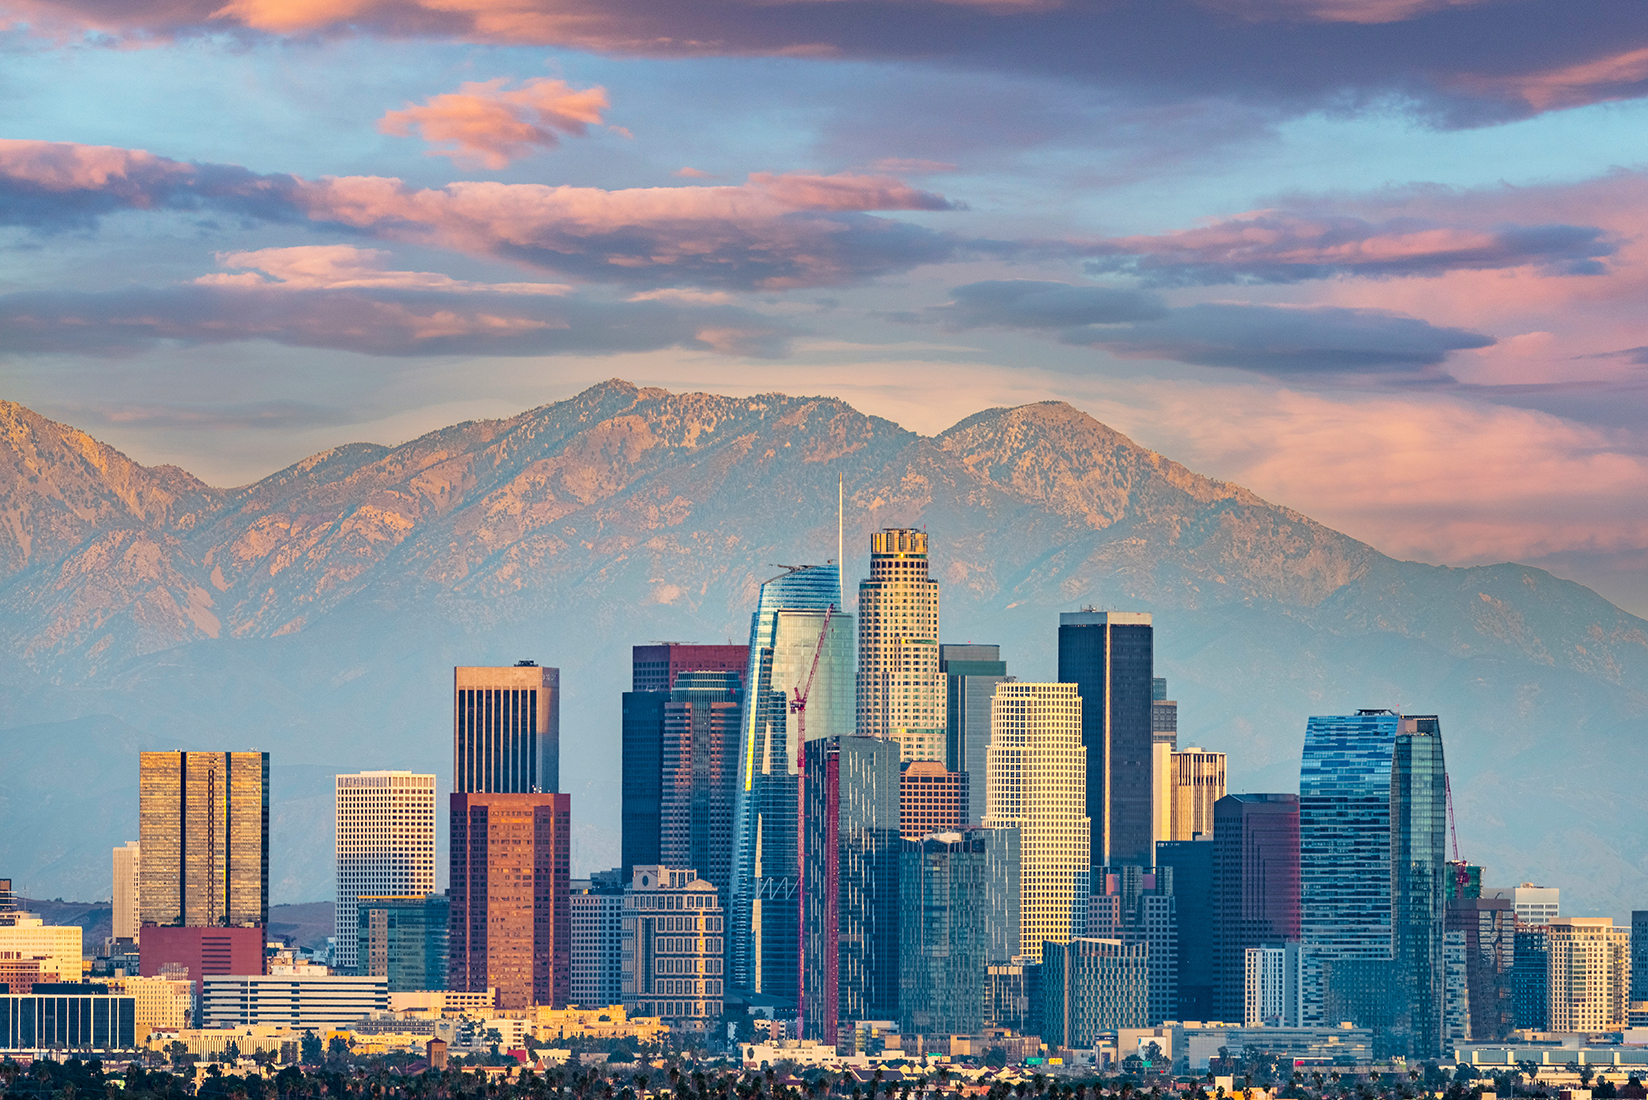 A view of Los Angeles with mountains in the background.